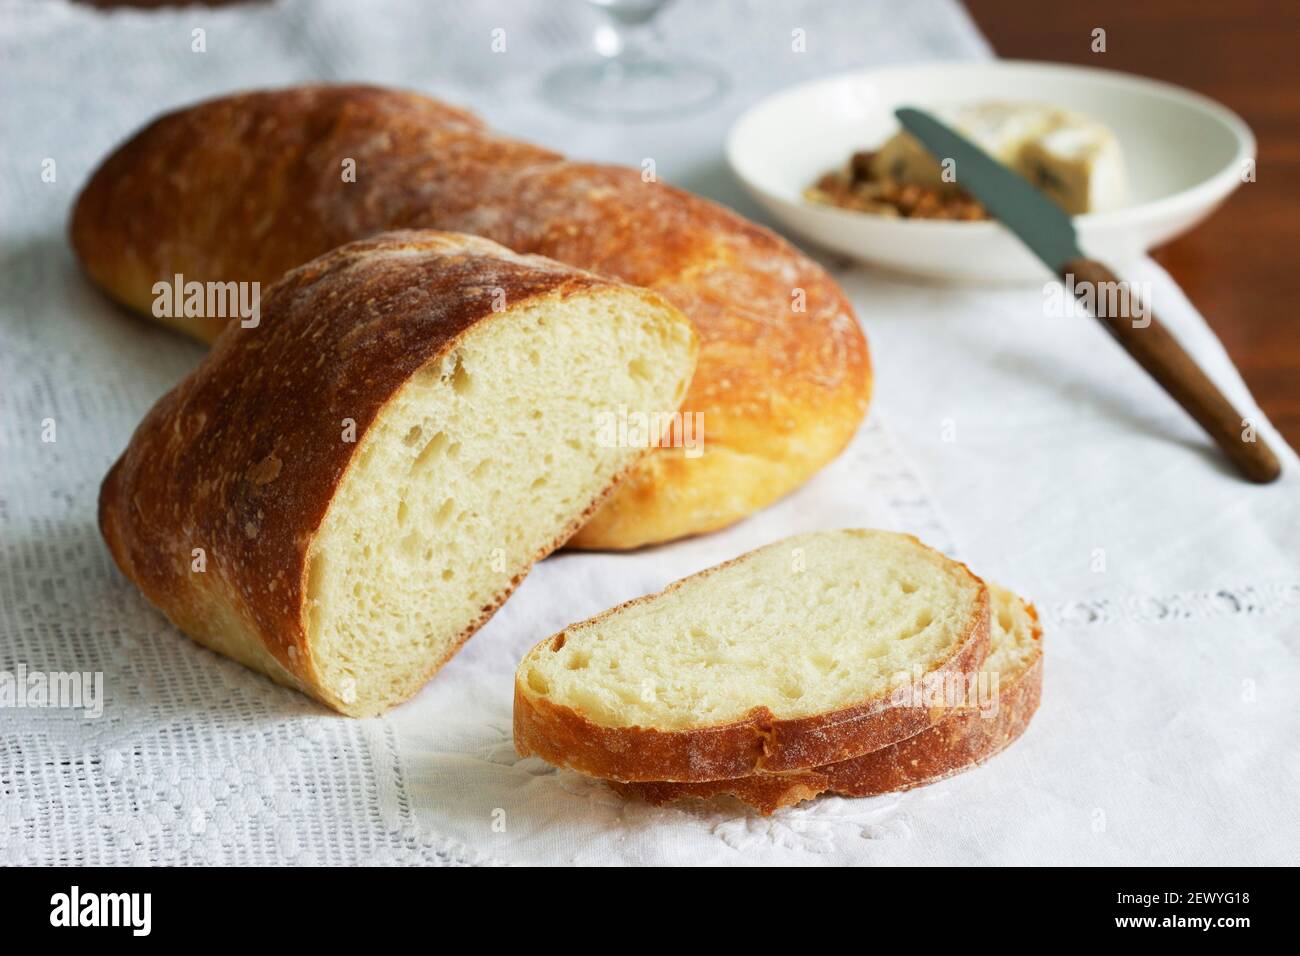 Ciabatta, cheese and nuts on a wooden table. Stock Photo